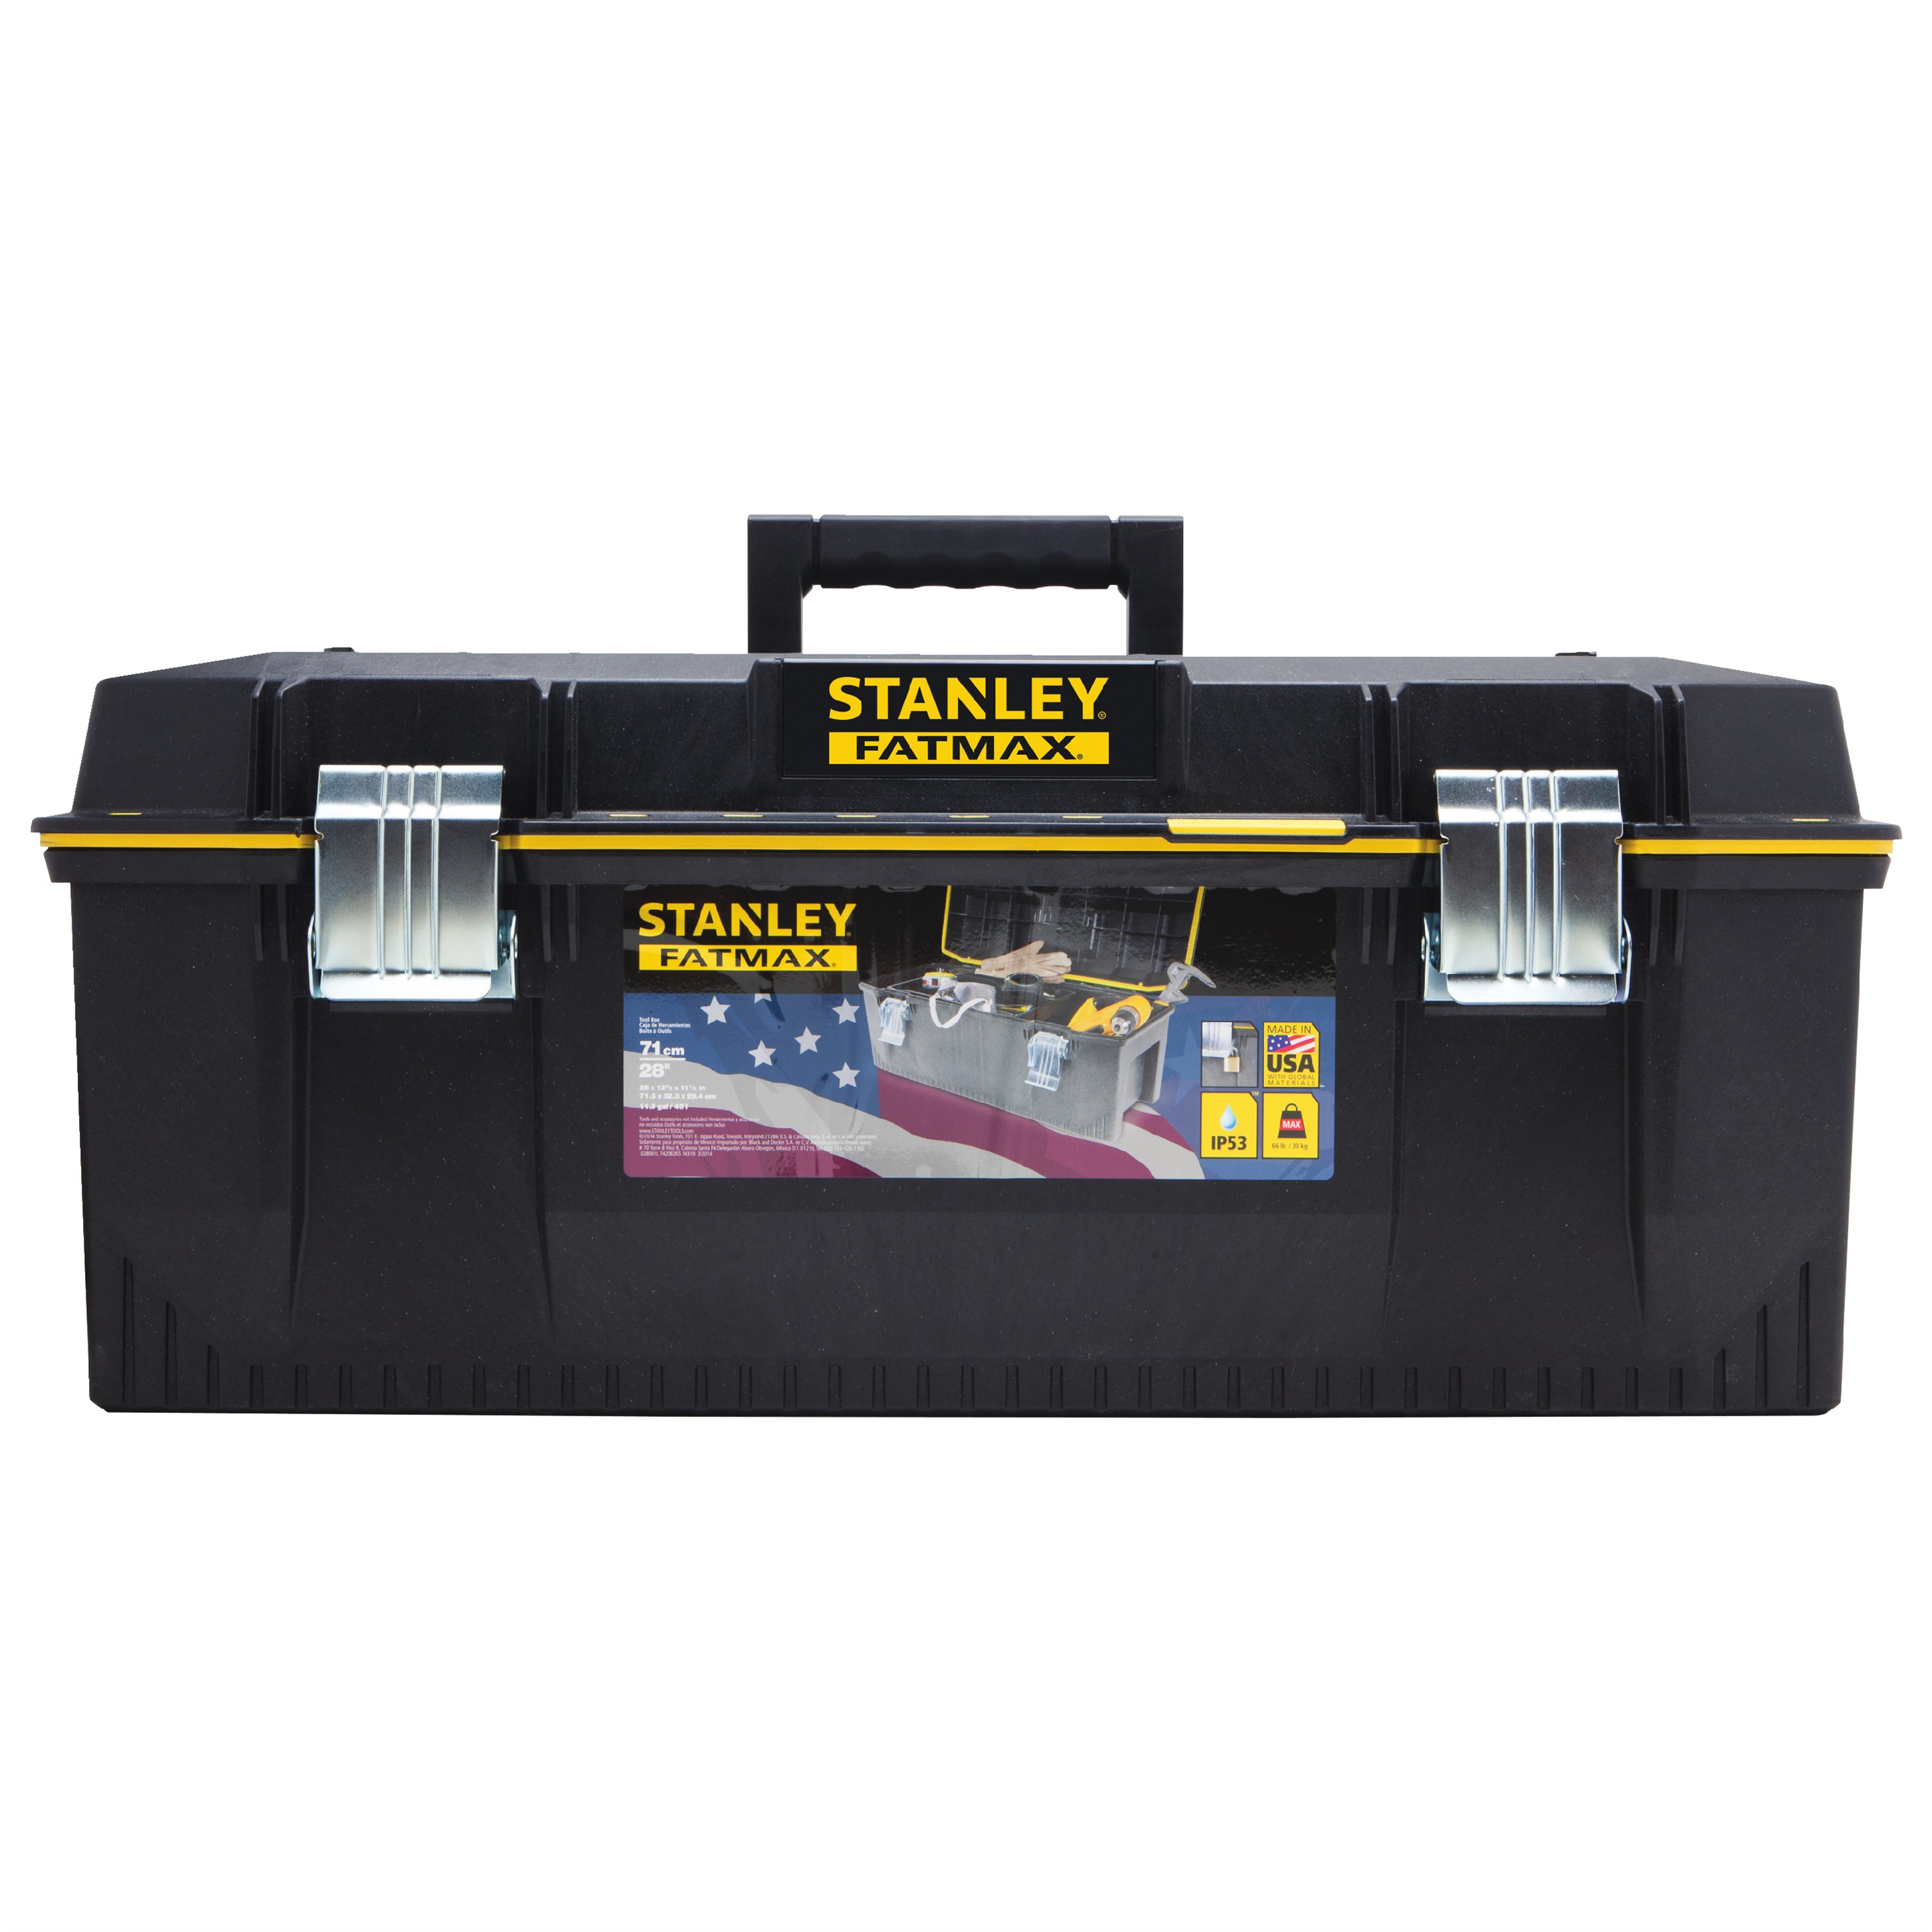 STANLEY FATMAX 028001L Structural Foam Tool Box, 28 In. - image 3 of 3